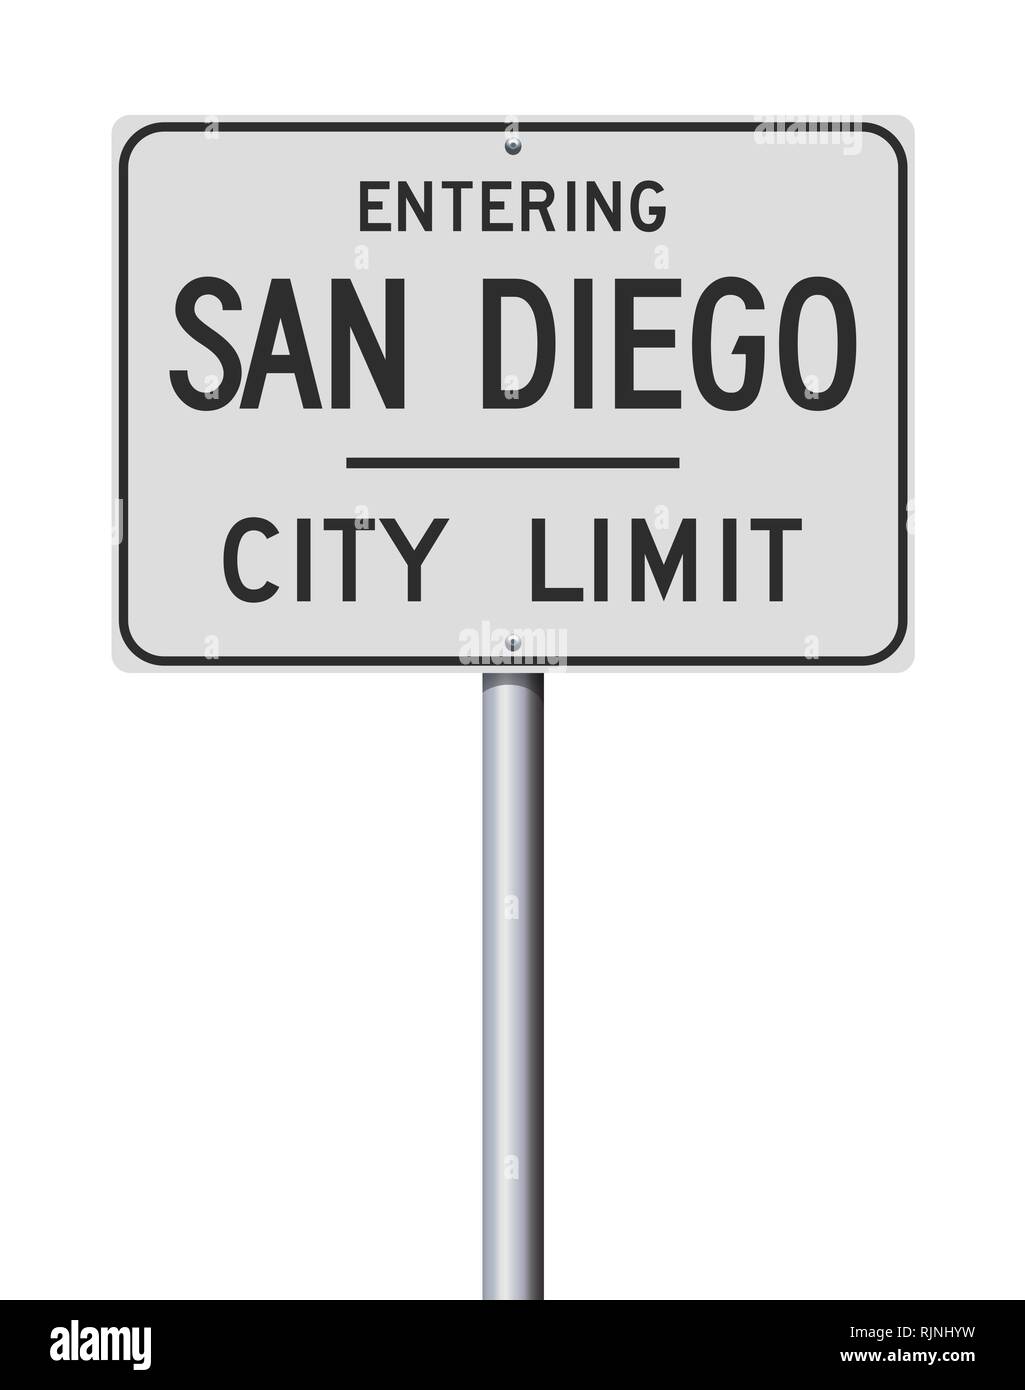 Vector illustration of the Entering San Diego City Limit white road sign Stock Vector